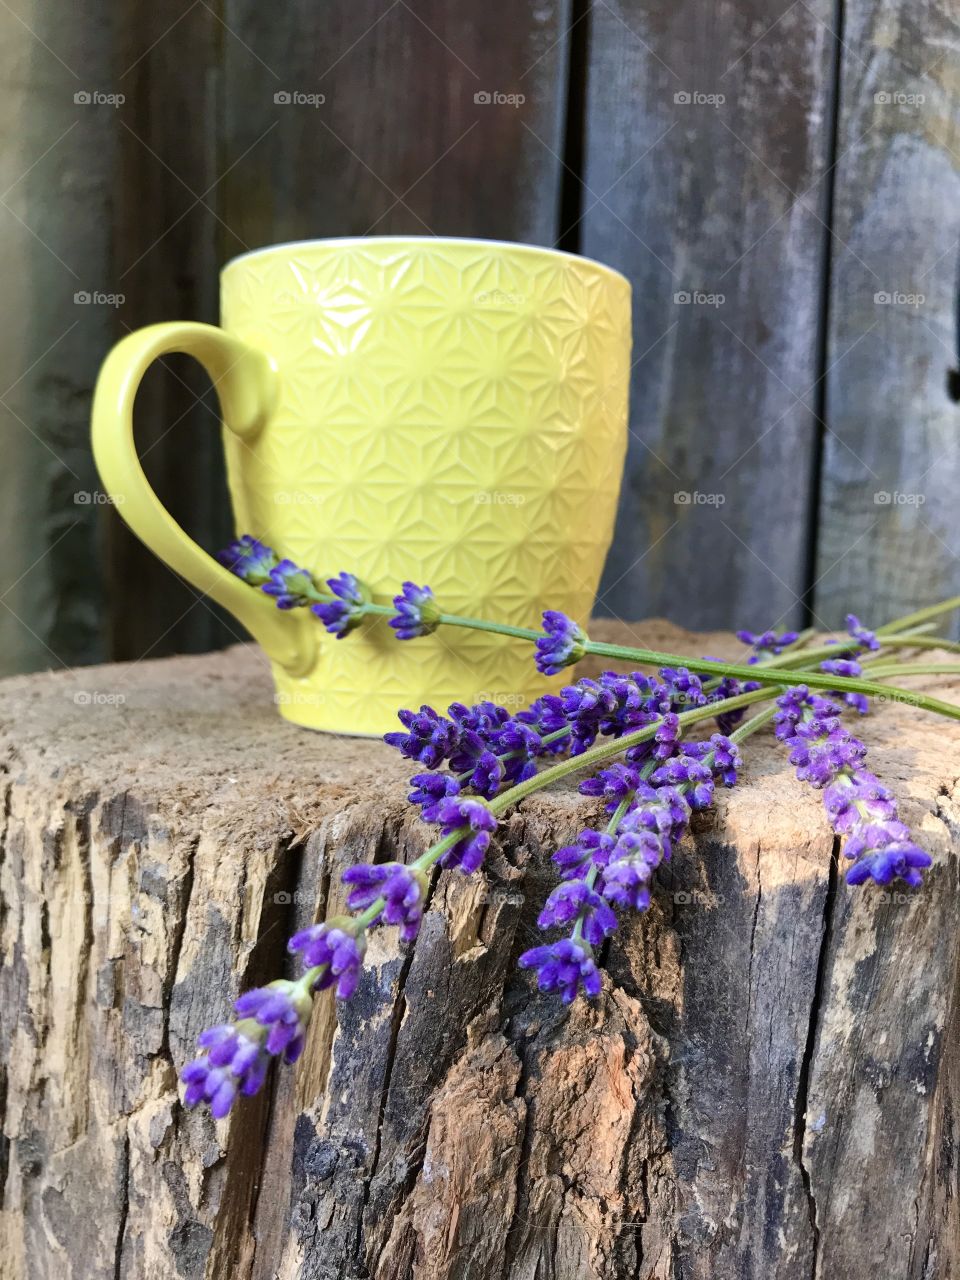 Yellow coffee mug/cup on the old log of wood with some purple lavender flowers laid out beside the cup.